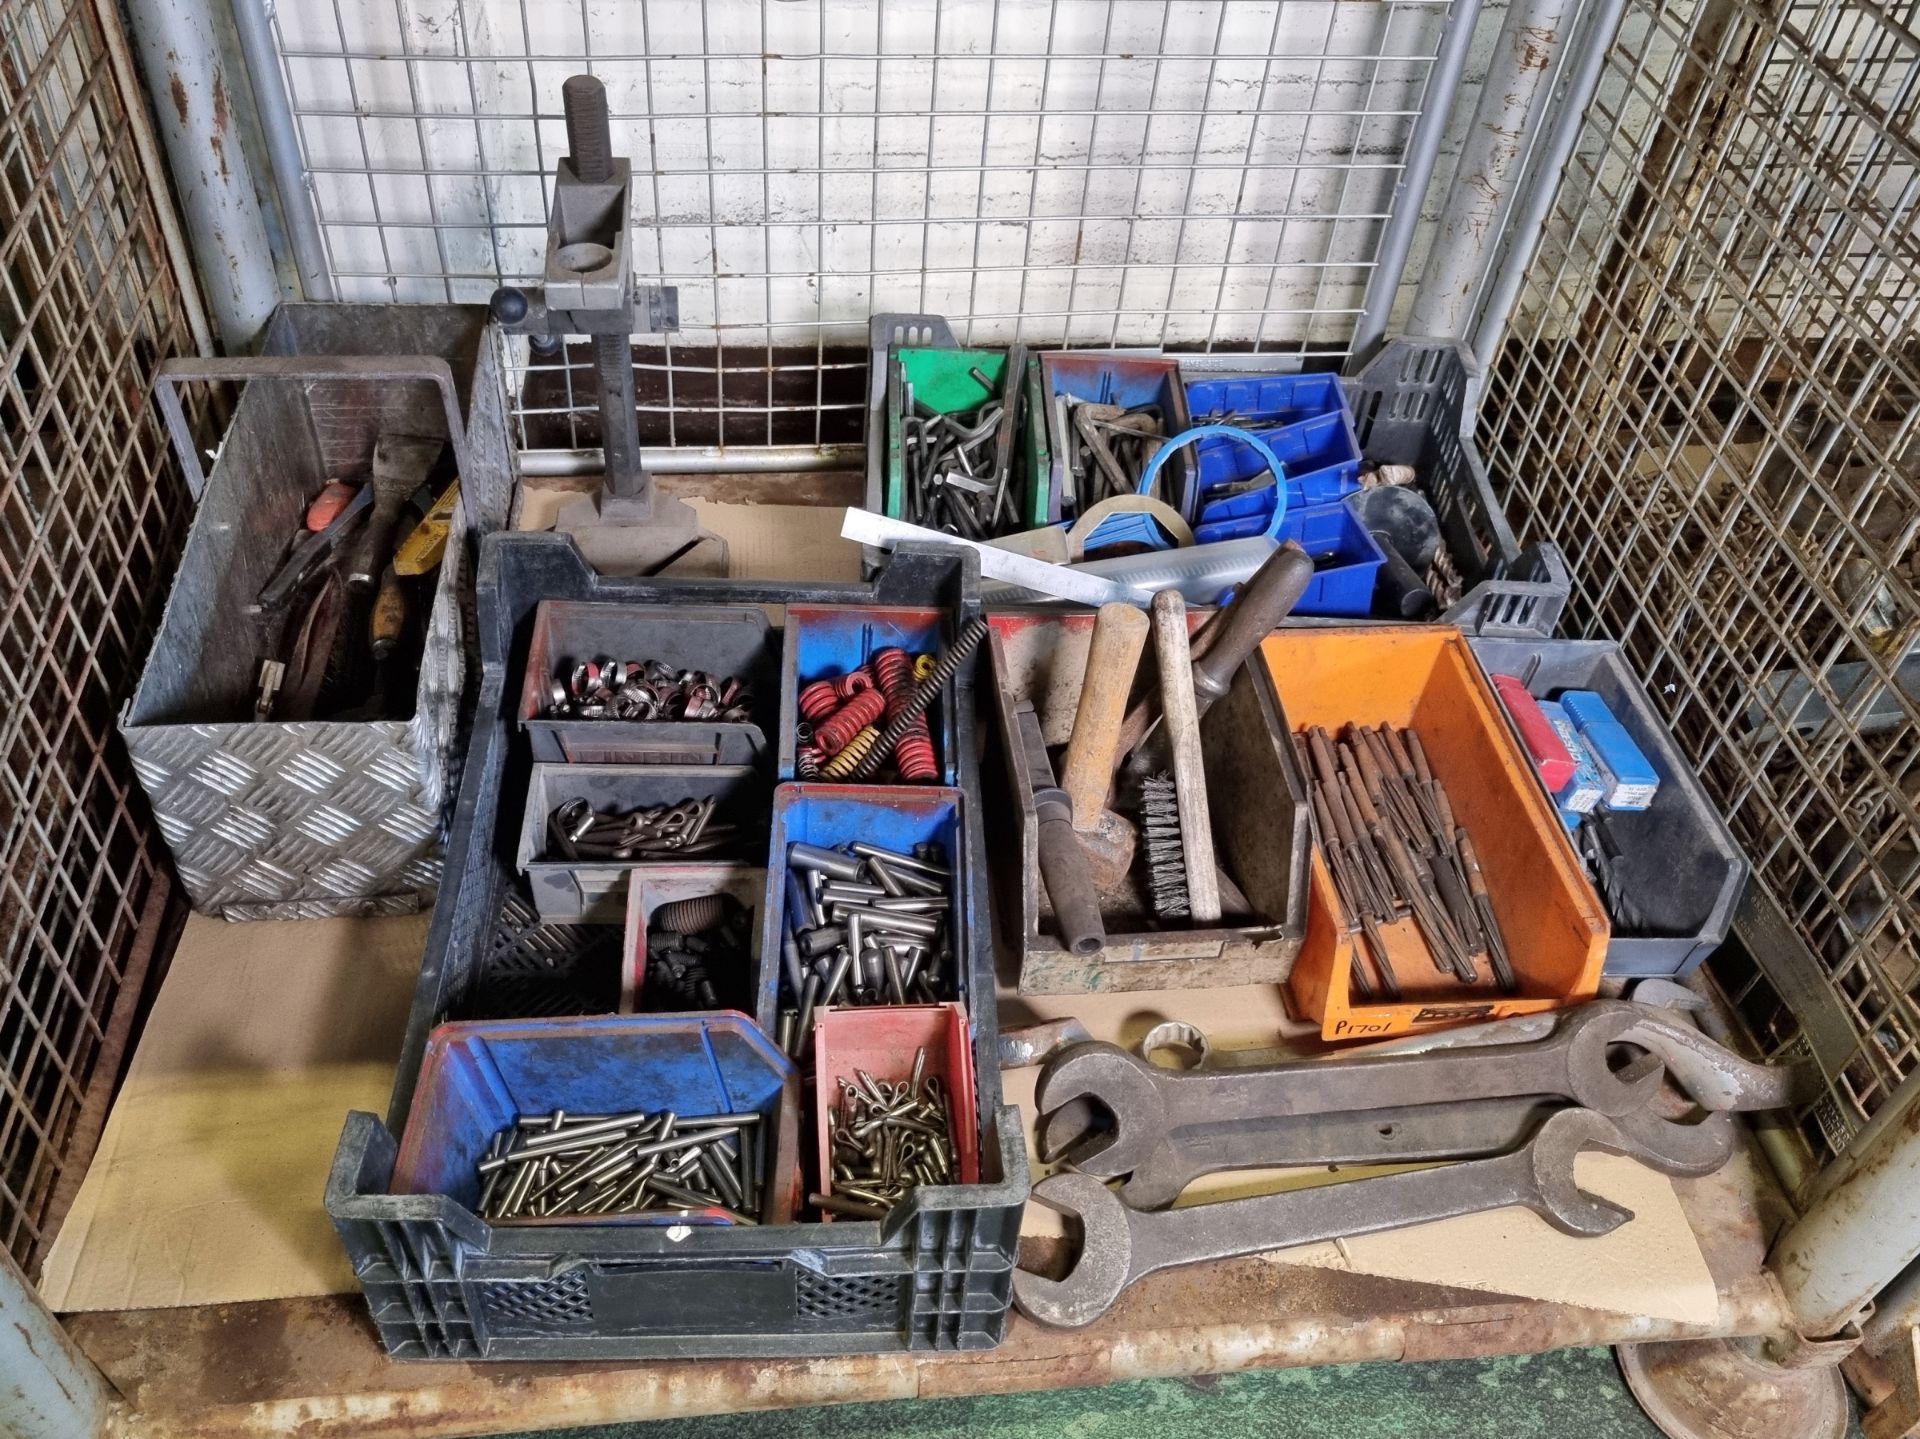 Workshop spares - spanners - roll pins - drill bits - allen keys - Image 2 of 7